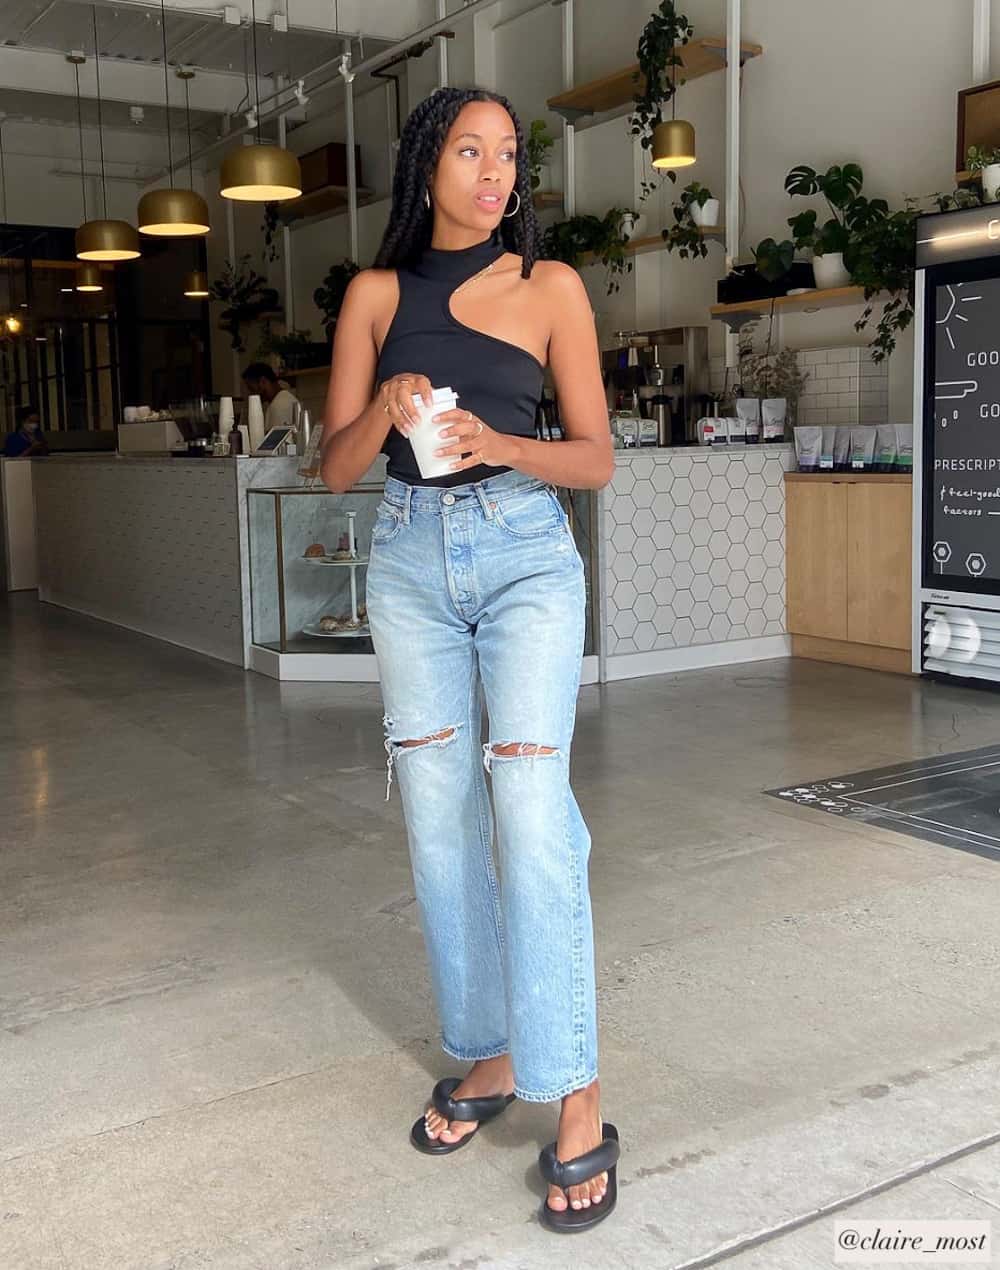 Black woman wearing a stylish outfit with cut out black tank top with straight-leg jeans and puffy flip flop sandals